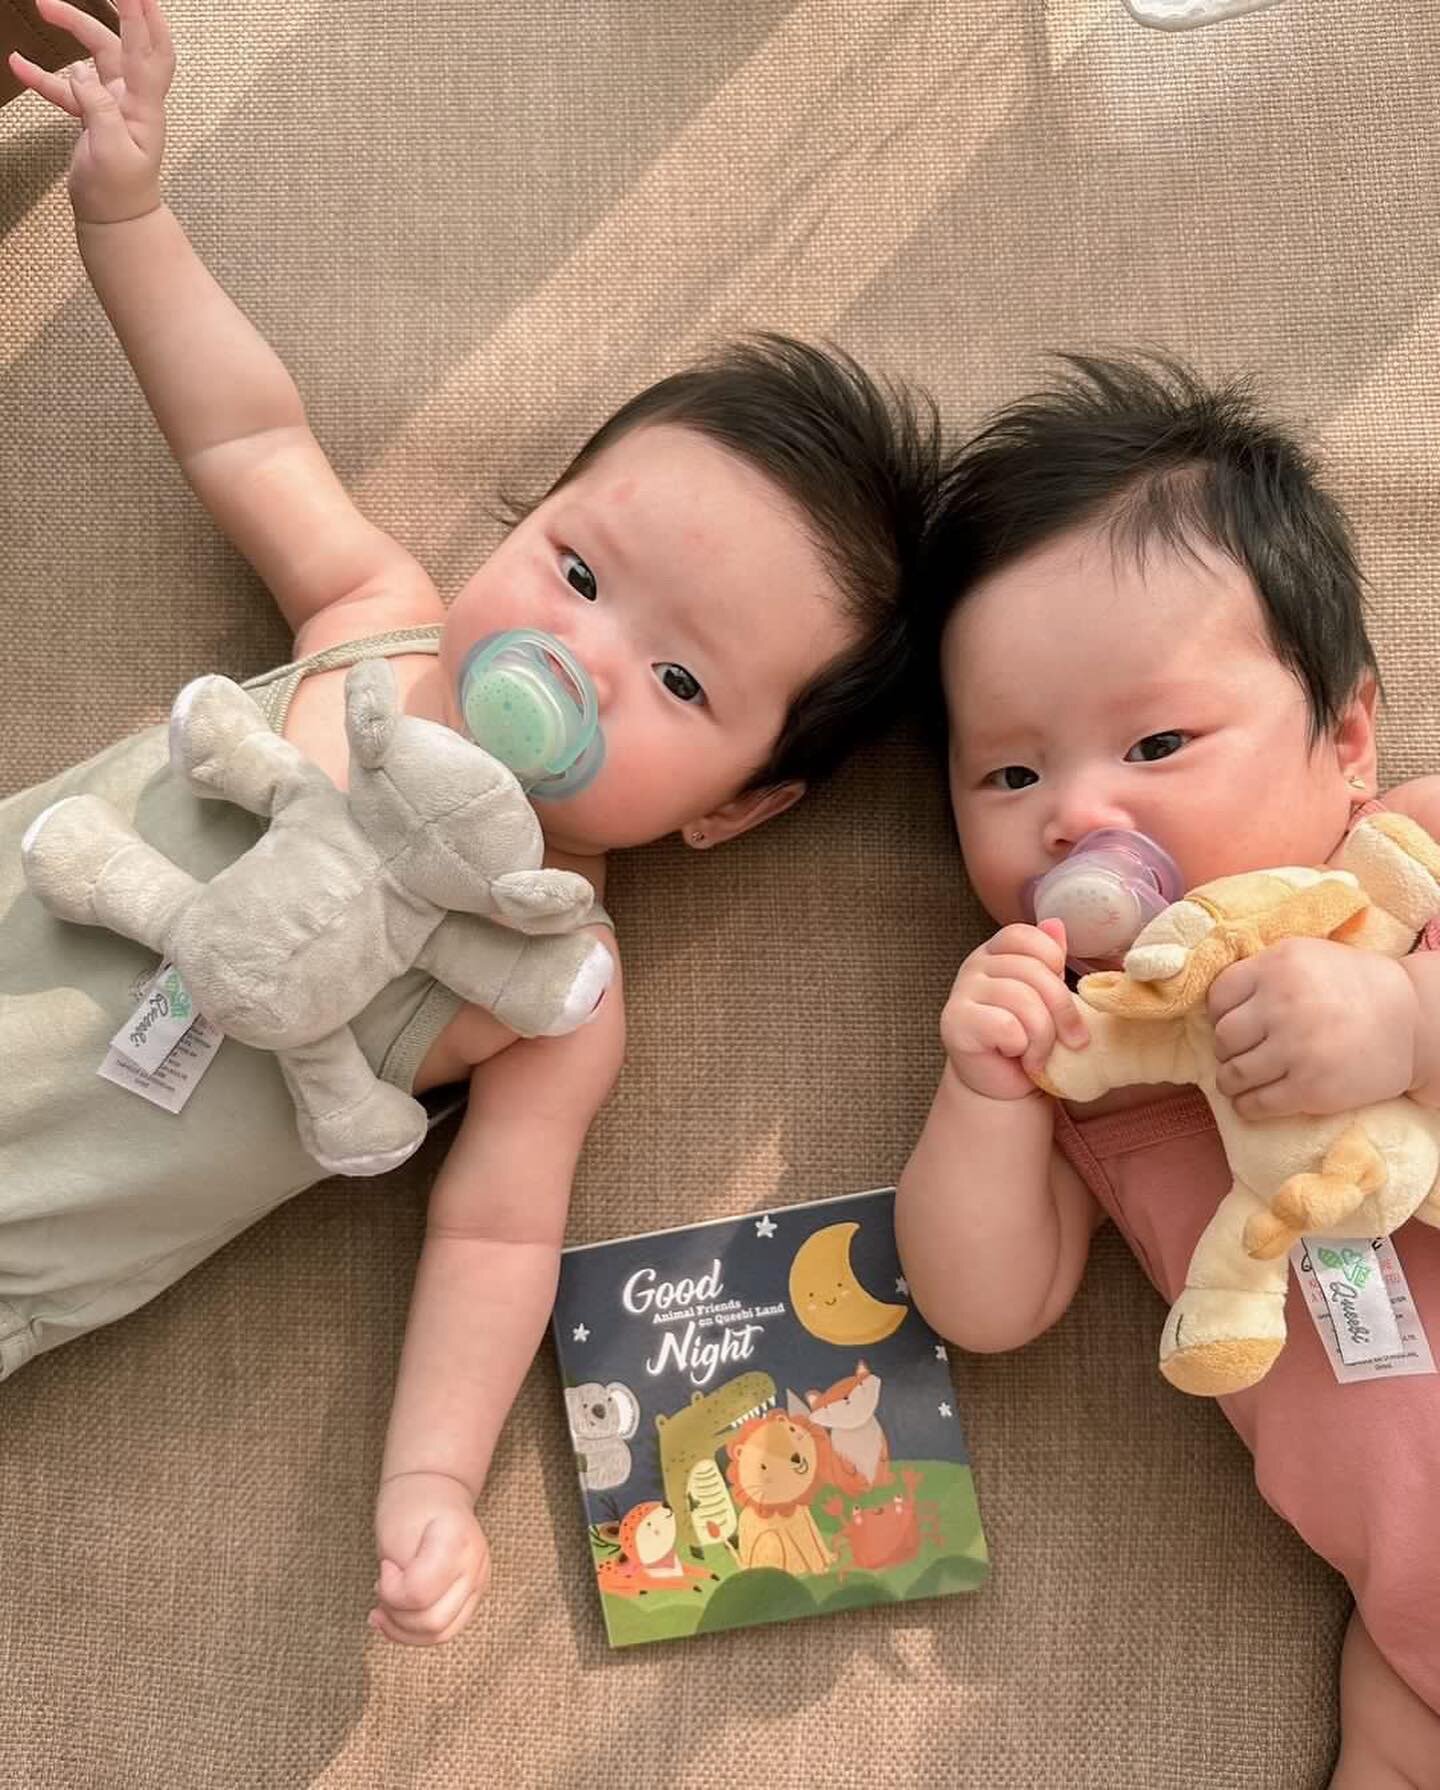 These two cuties ❤️❤️
.
Photo credit @le.leona.a
.
#queebi #queebibaby #babyshowergift #babyproduct #babycollab #babyshower